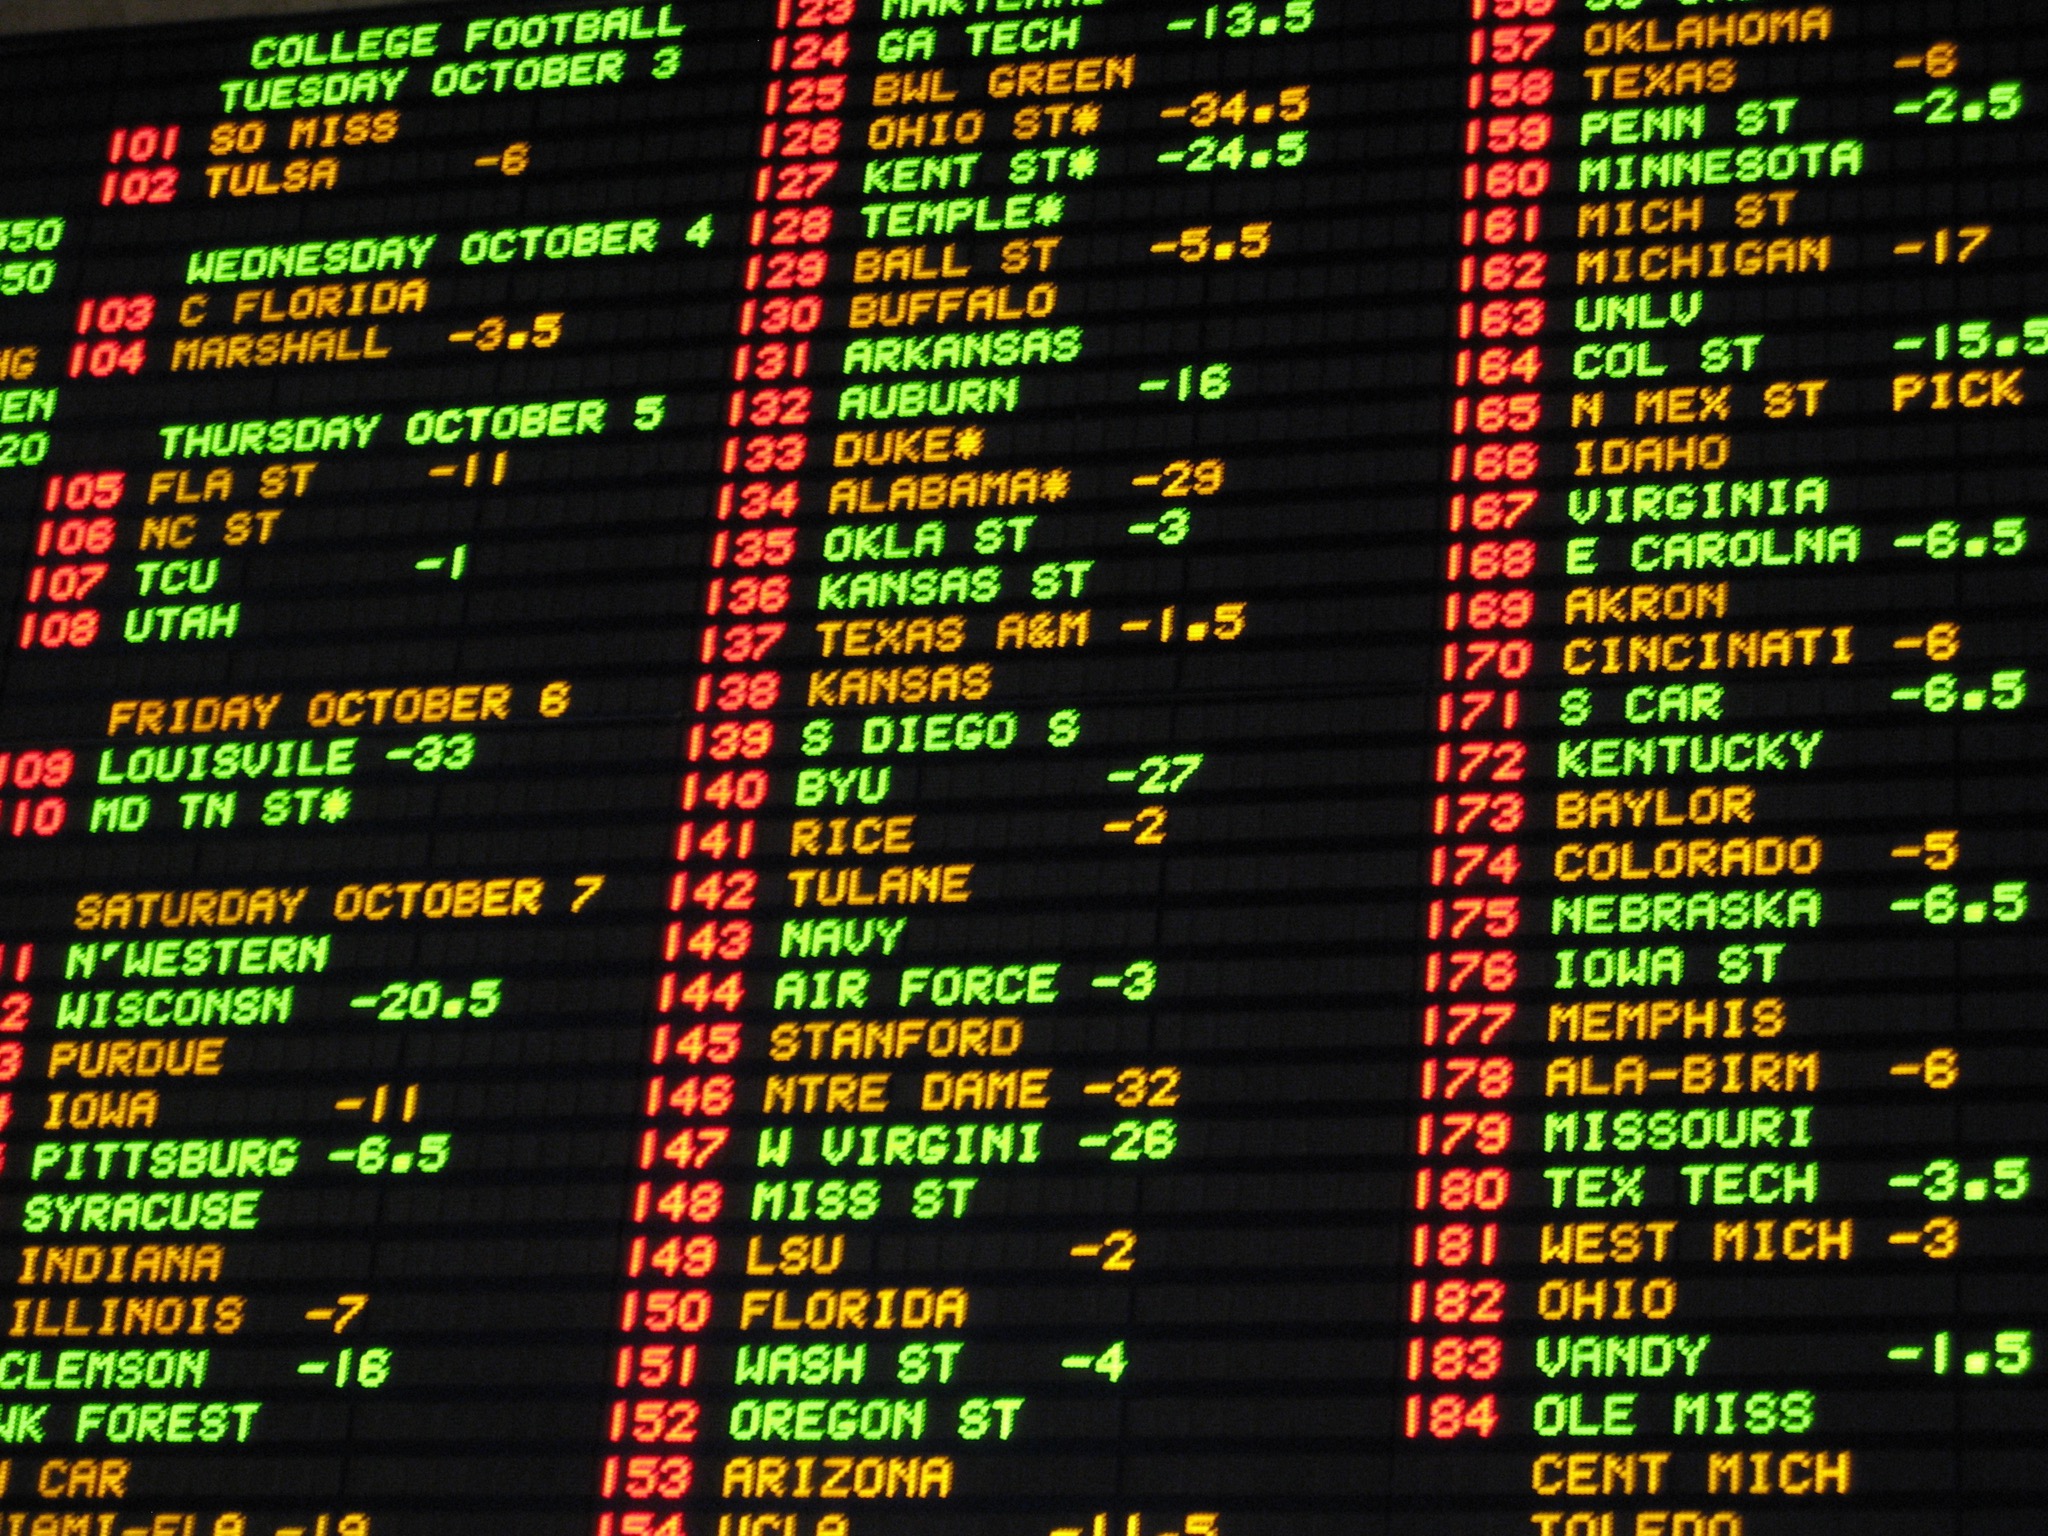 Early College Football 2020 National Championship Betting Odds Released